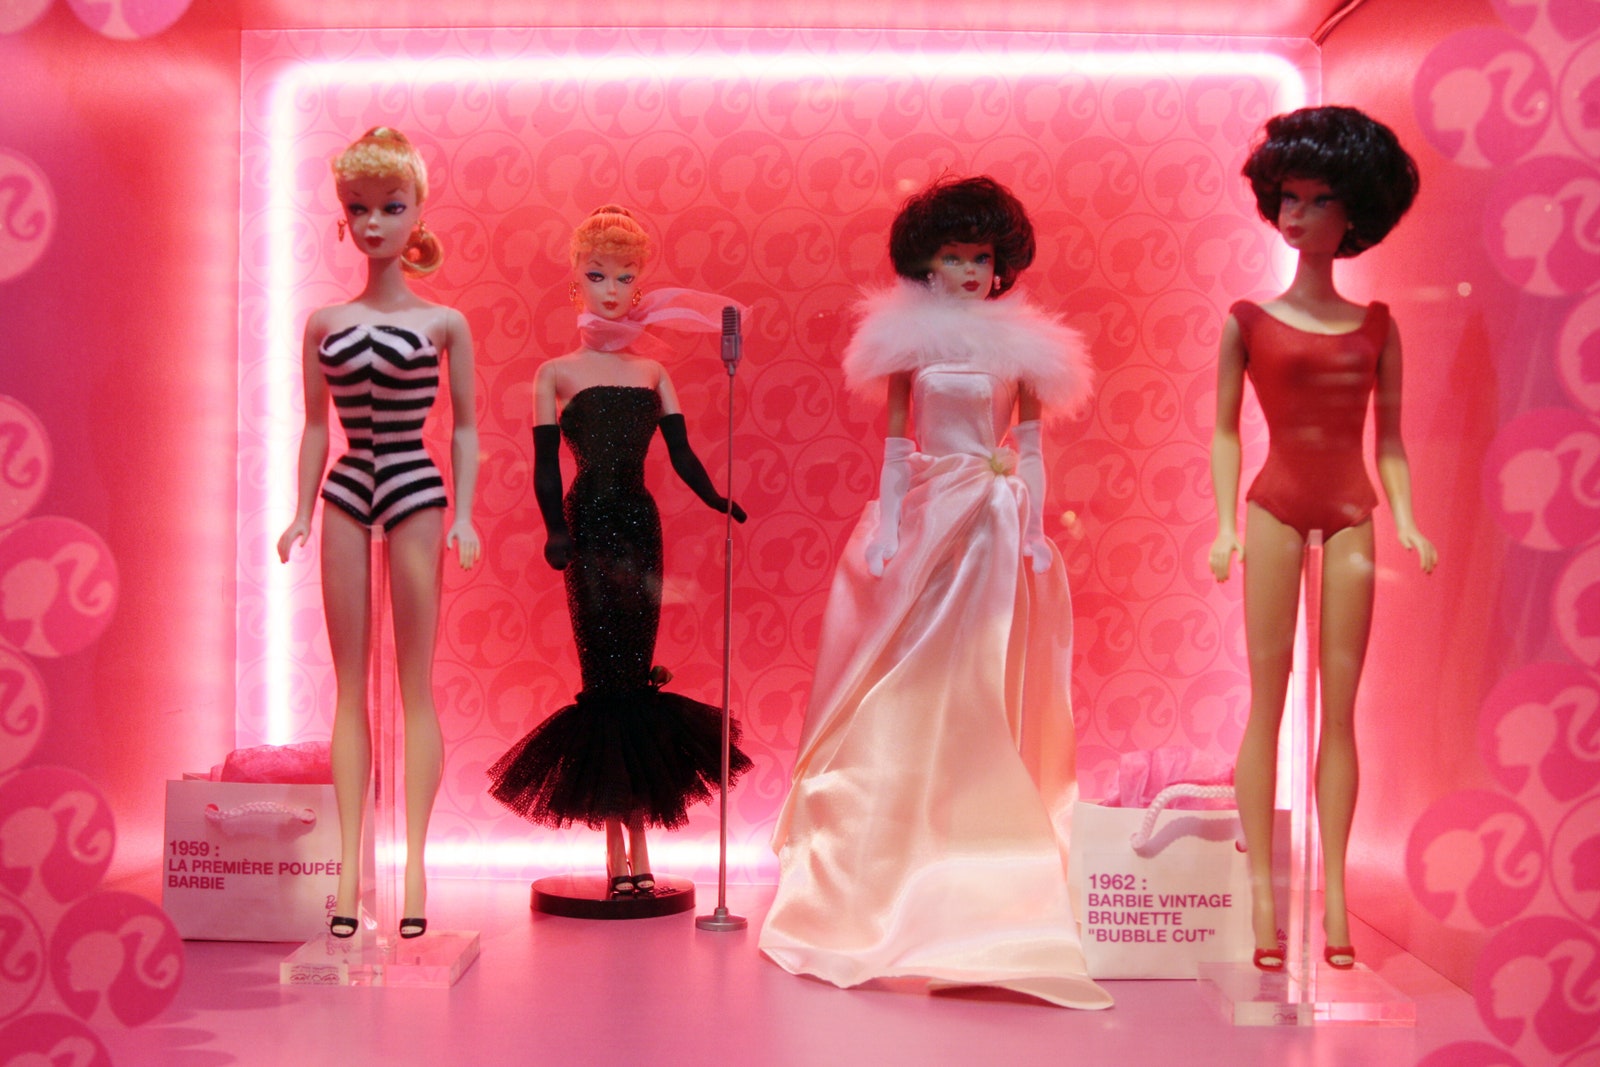 Vintage barbie dolls on display at an exhibition.